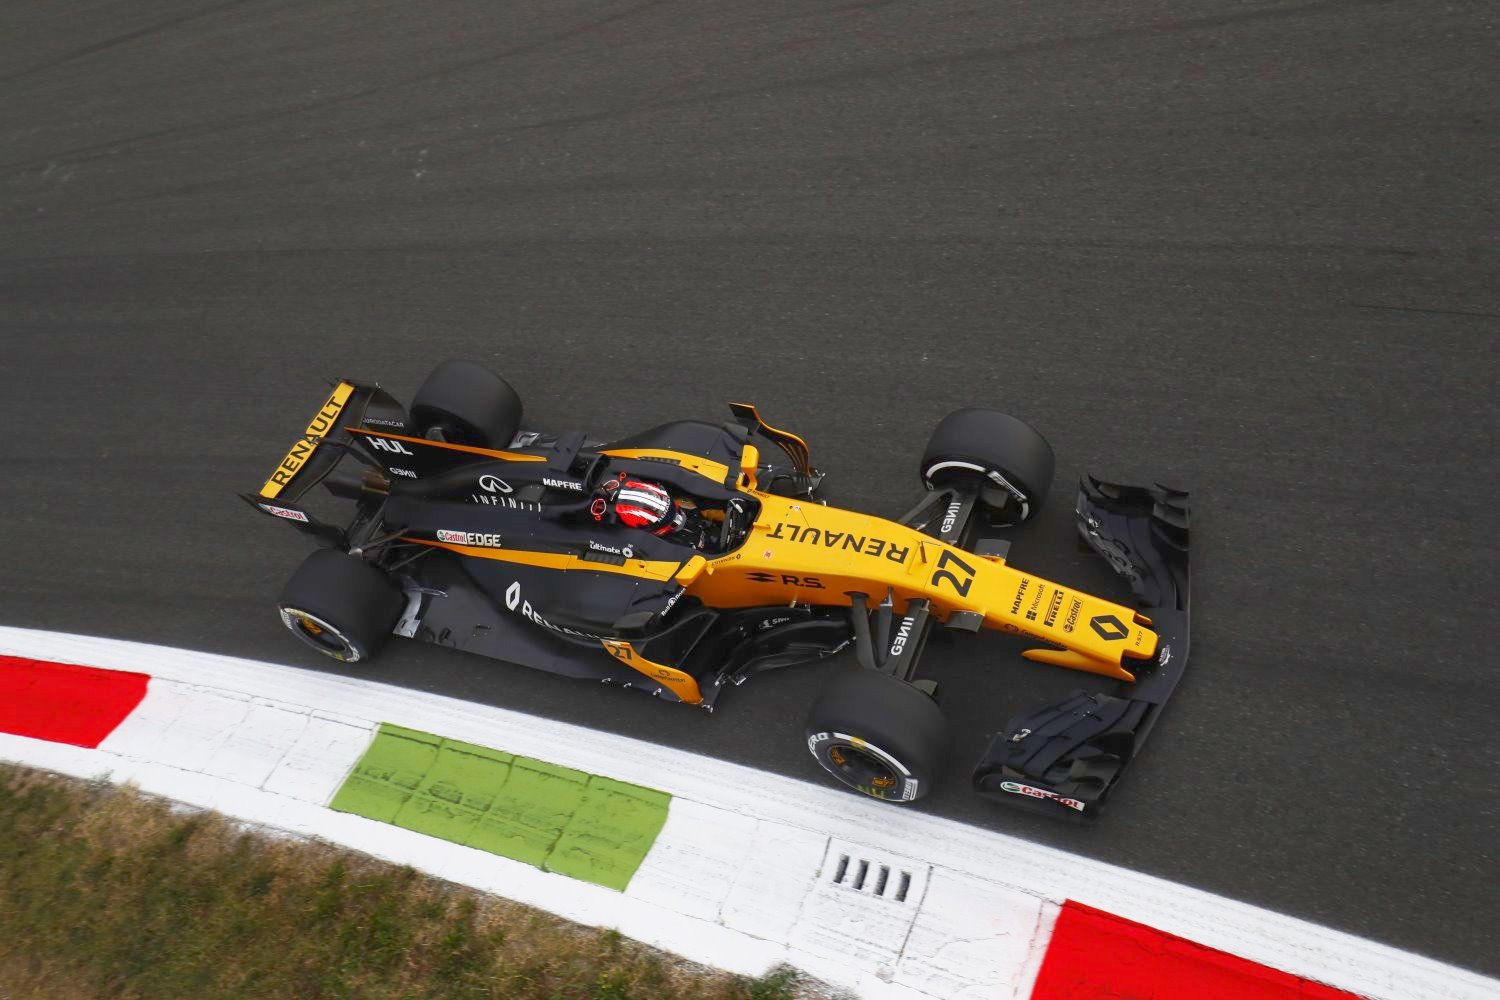 The Renault engine will make McLaren a midfield competitor at best